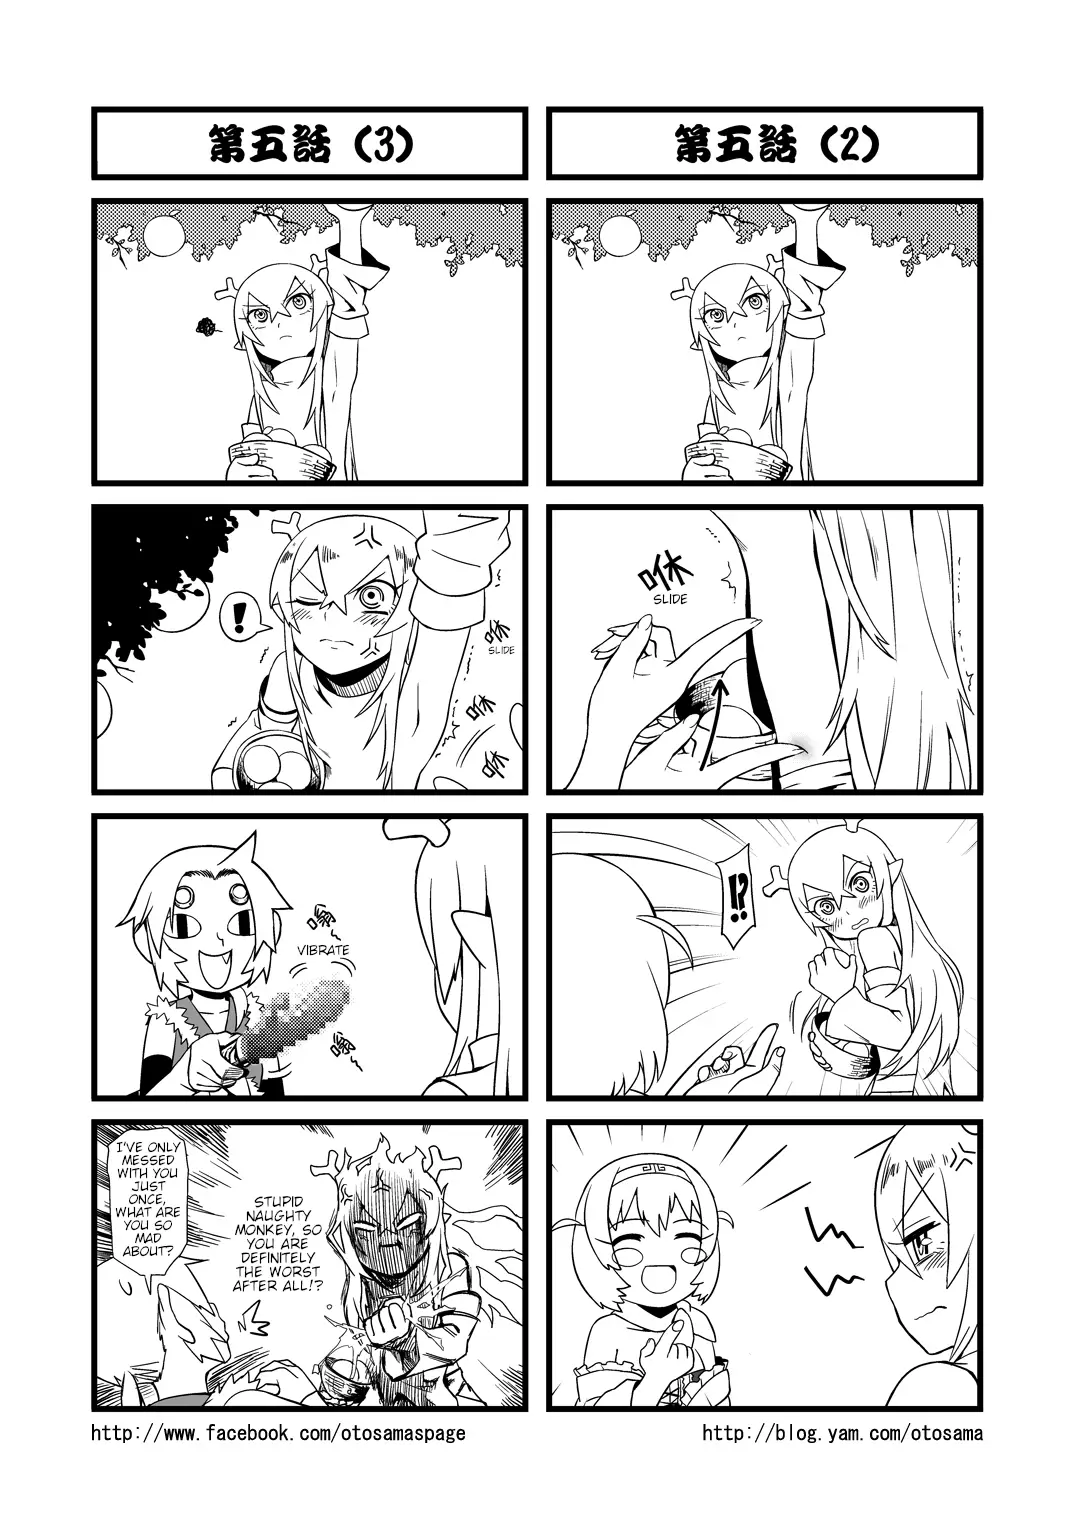 Tang Hill Burial - Journey To The West Irresponsible Anything Goes Edition - 5 page 2